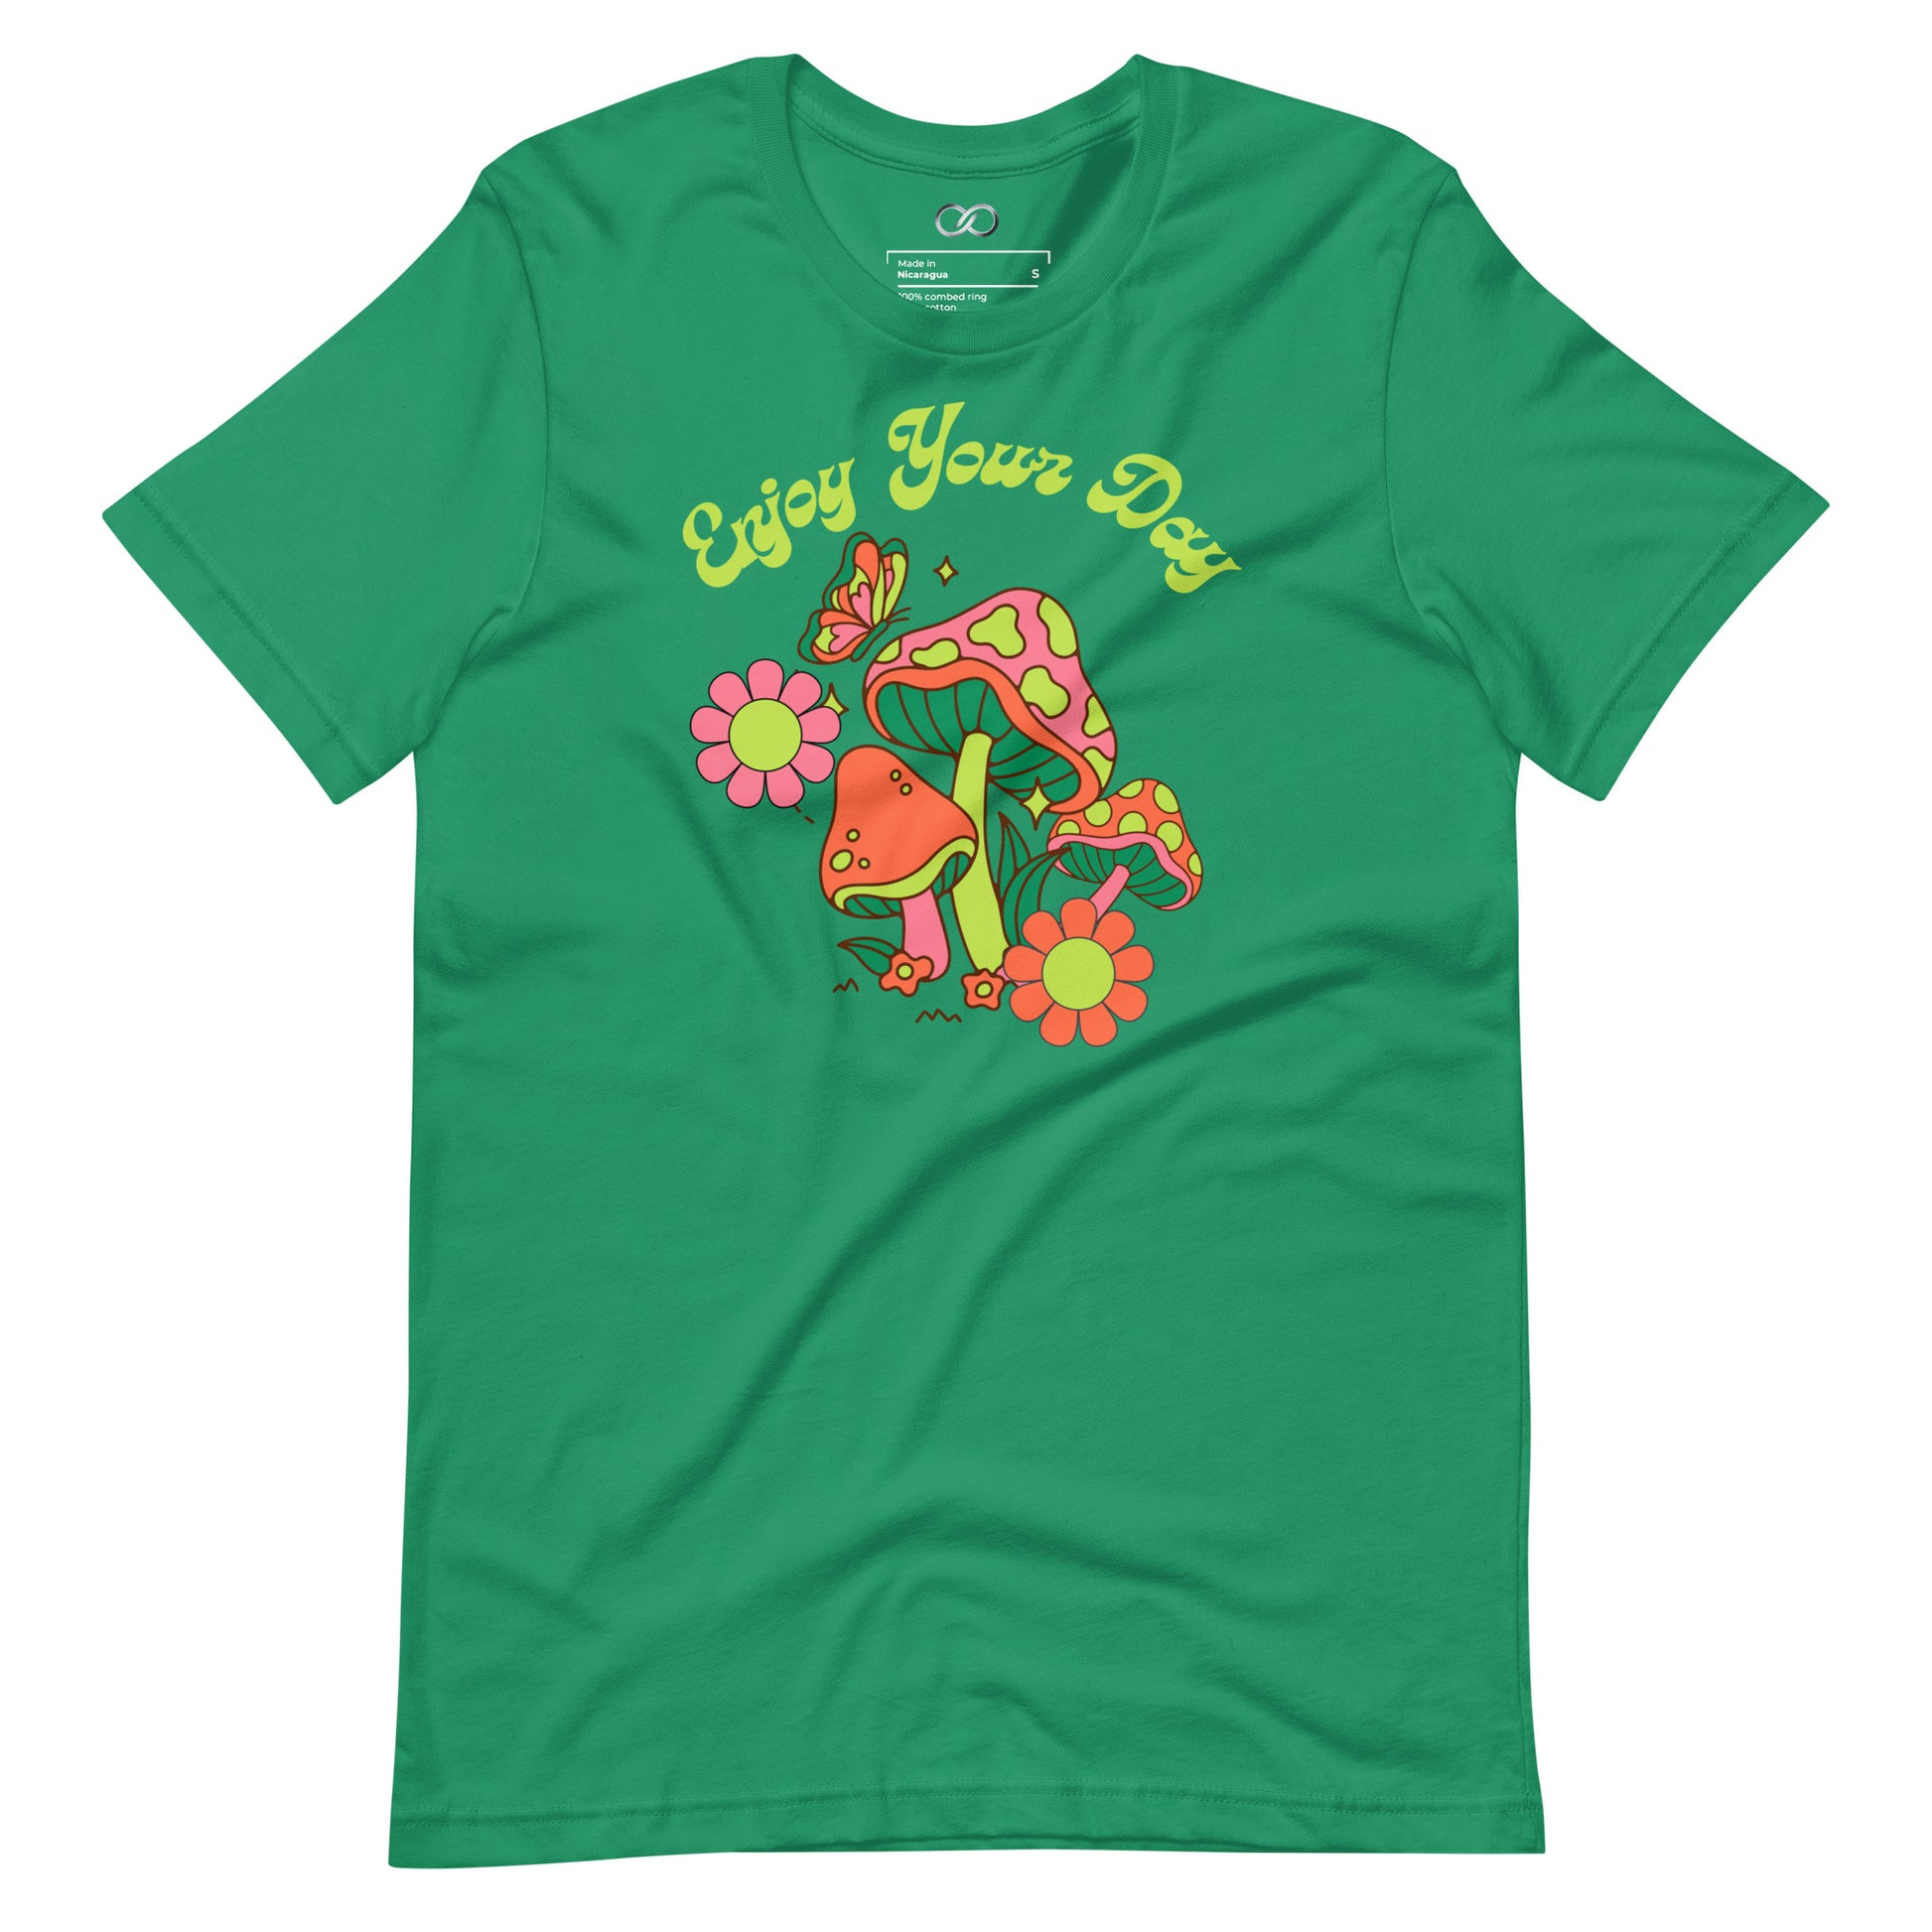 A green short sleeve shirt featuring a colorful 'Enjoy Your Day' mushroom design, combining comfort with a cheerful saying.